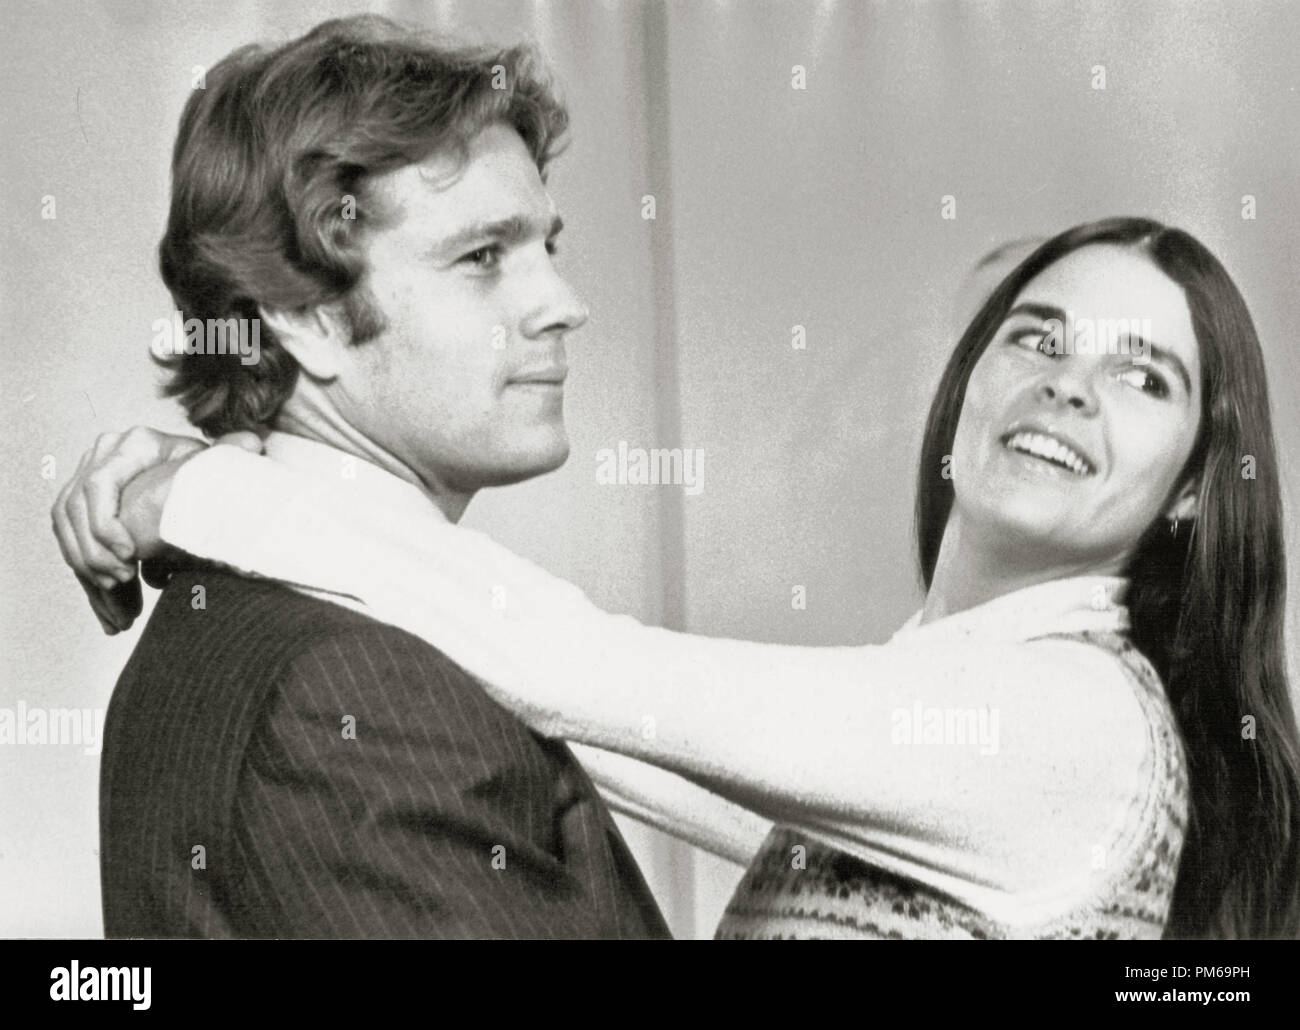 Ryan O'Neal and Ali MacGraw, "Love Story" 1970 Paramount  File Reference # 31316_374THA Stock Photo